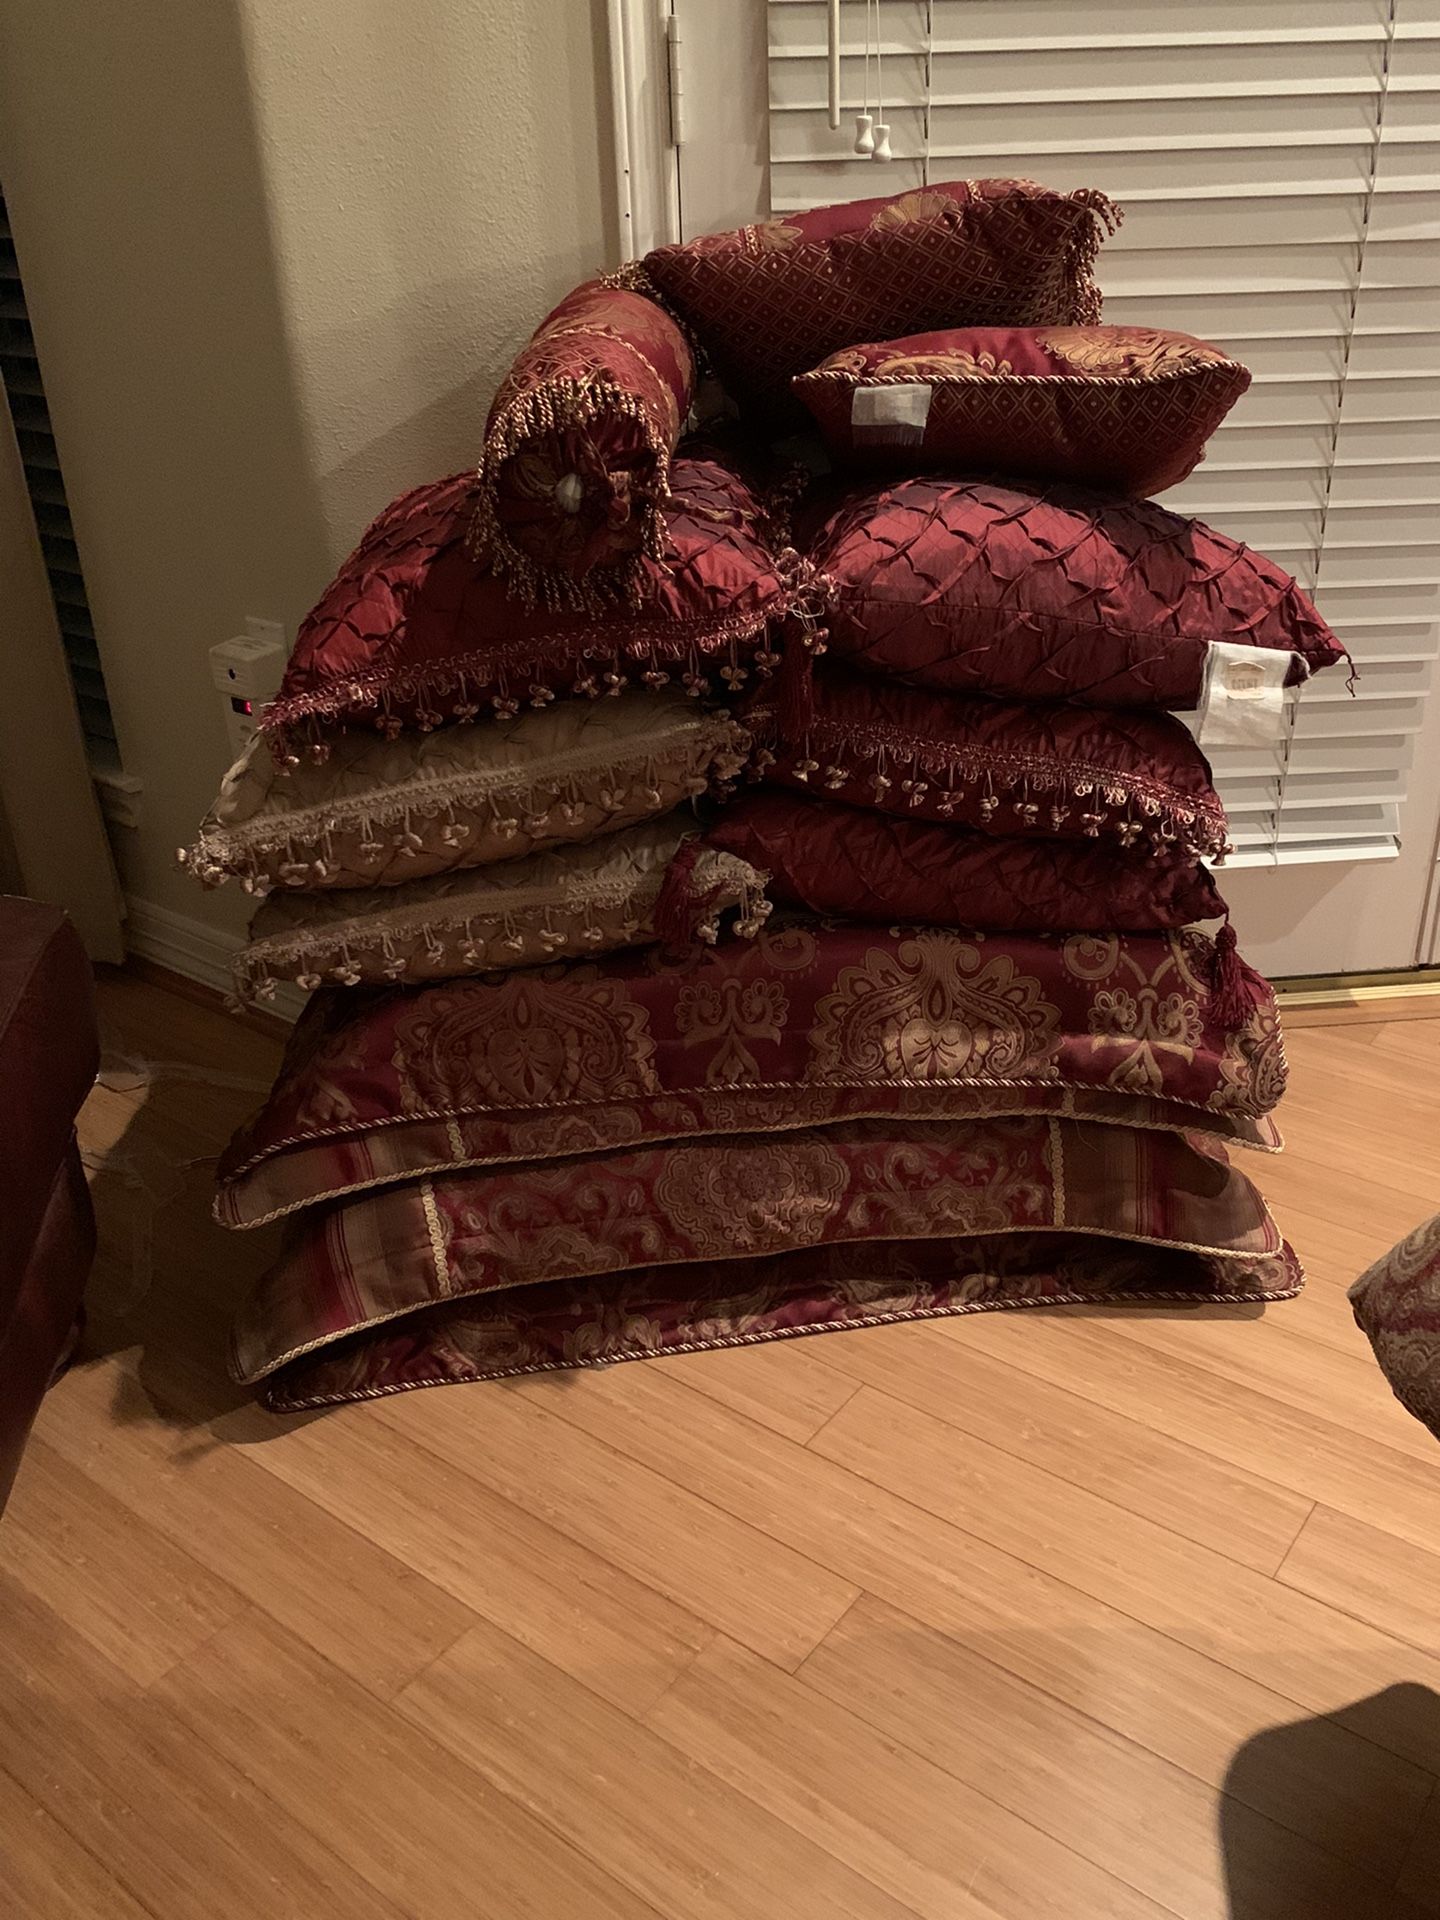 King Comforter -Maroon with Gold